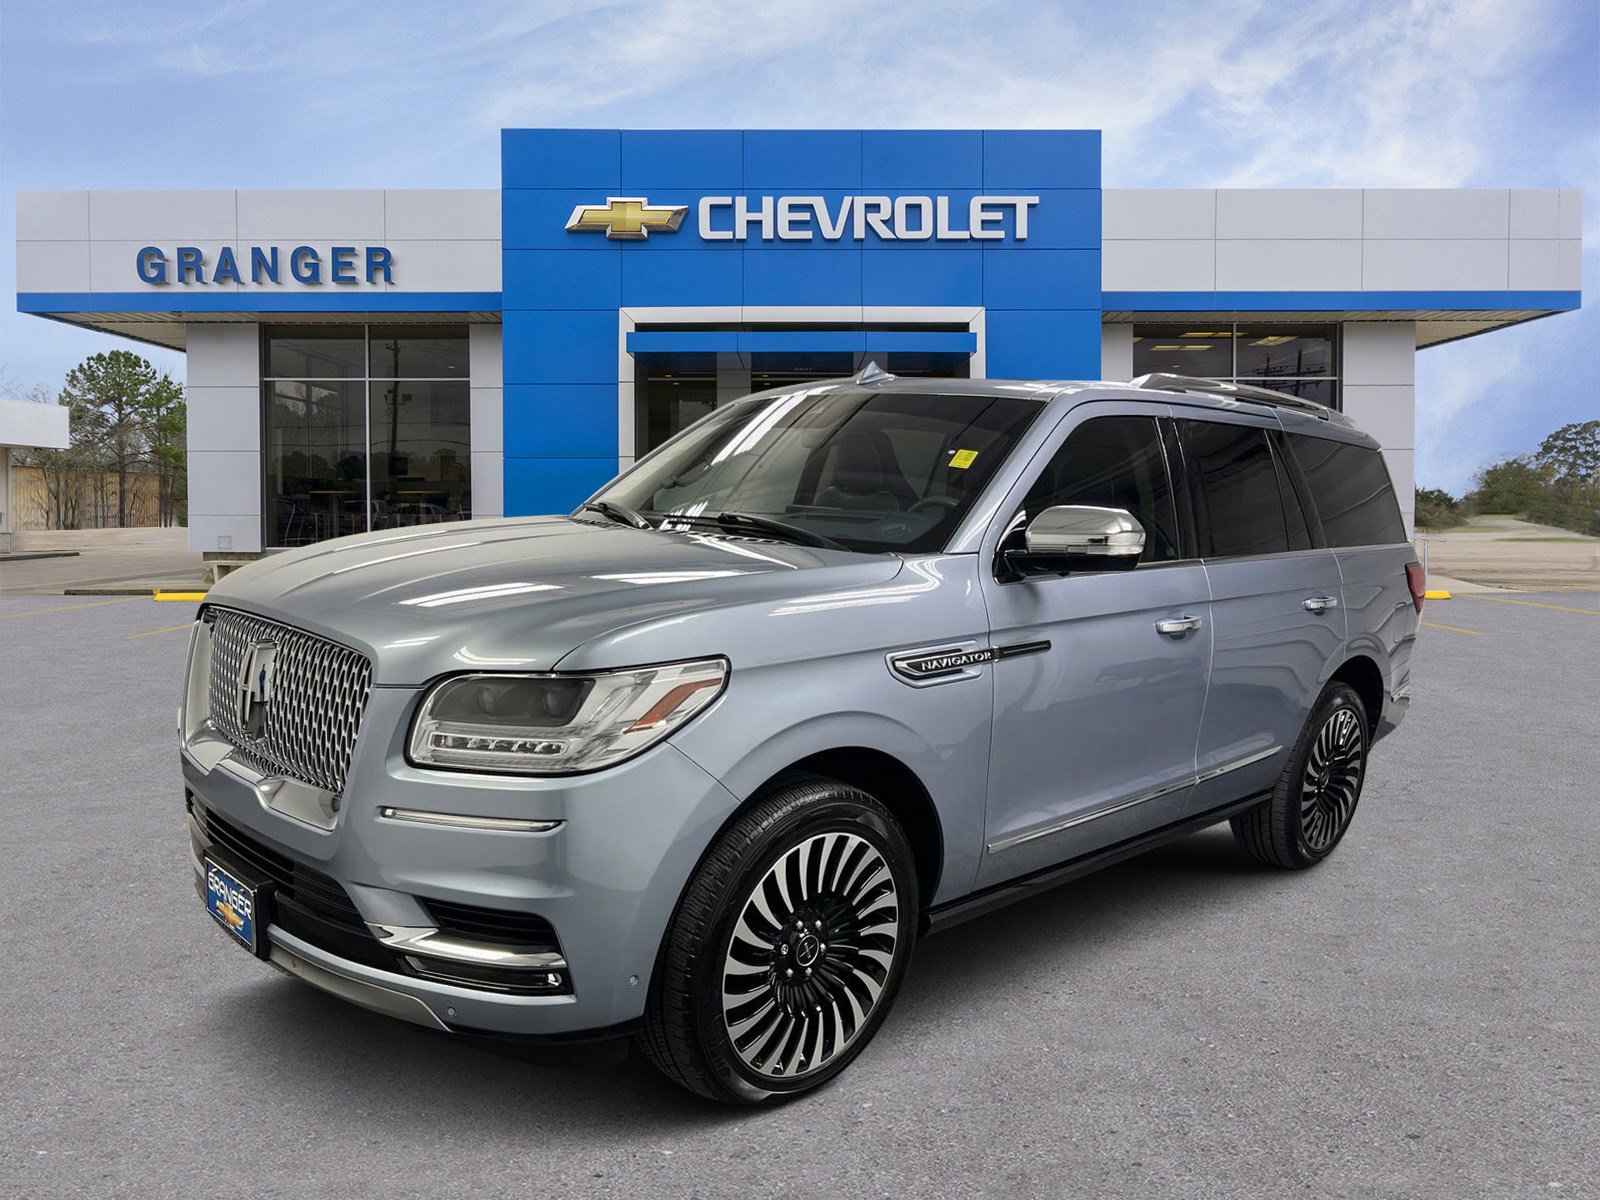 Used 2019 Lincoln Navigator for Sale Right Now - Autotrader